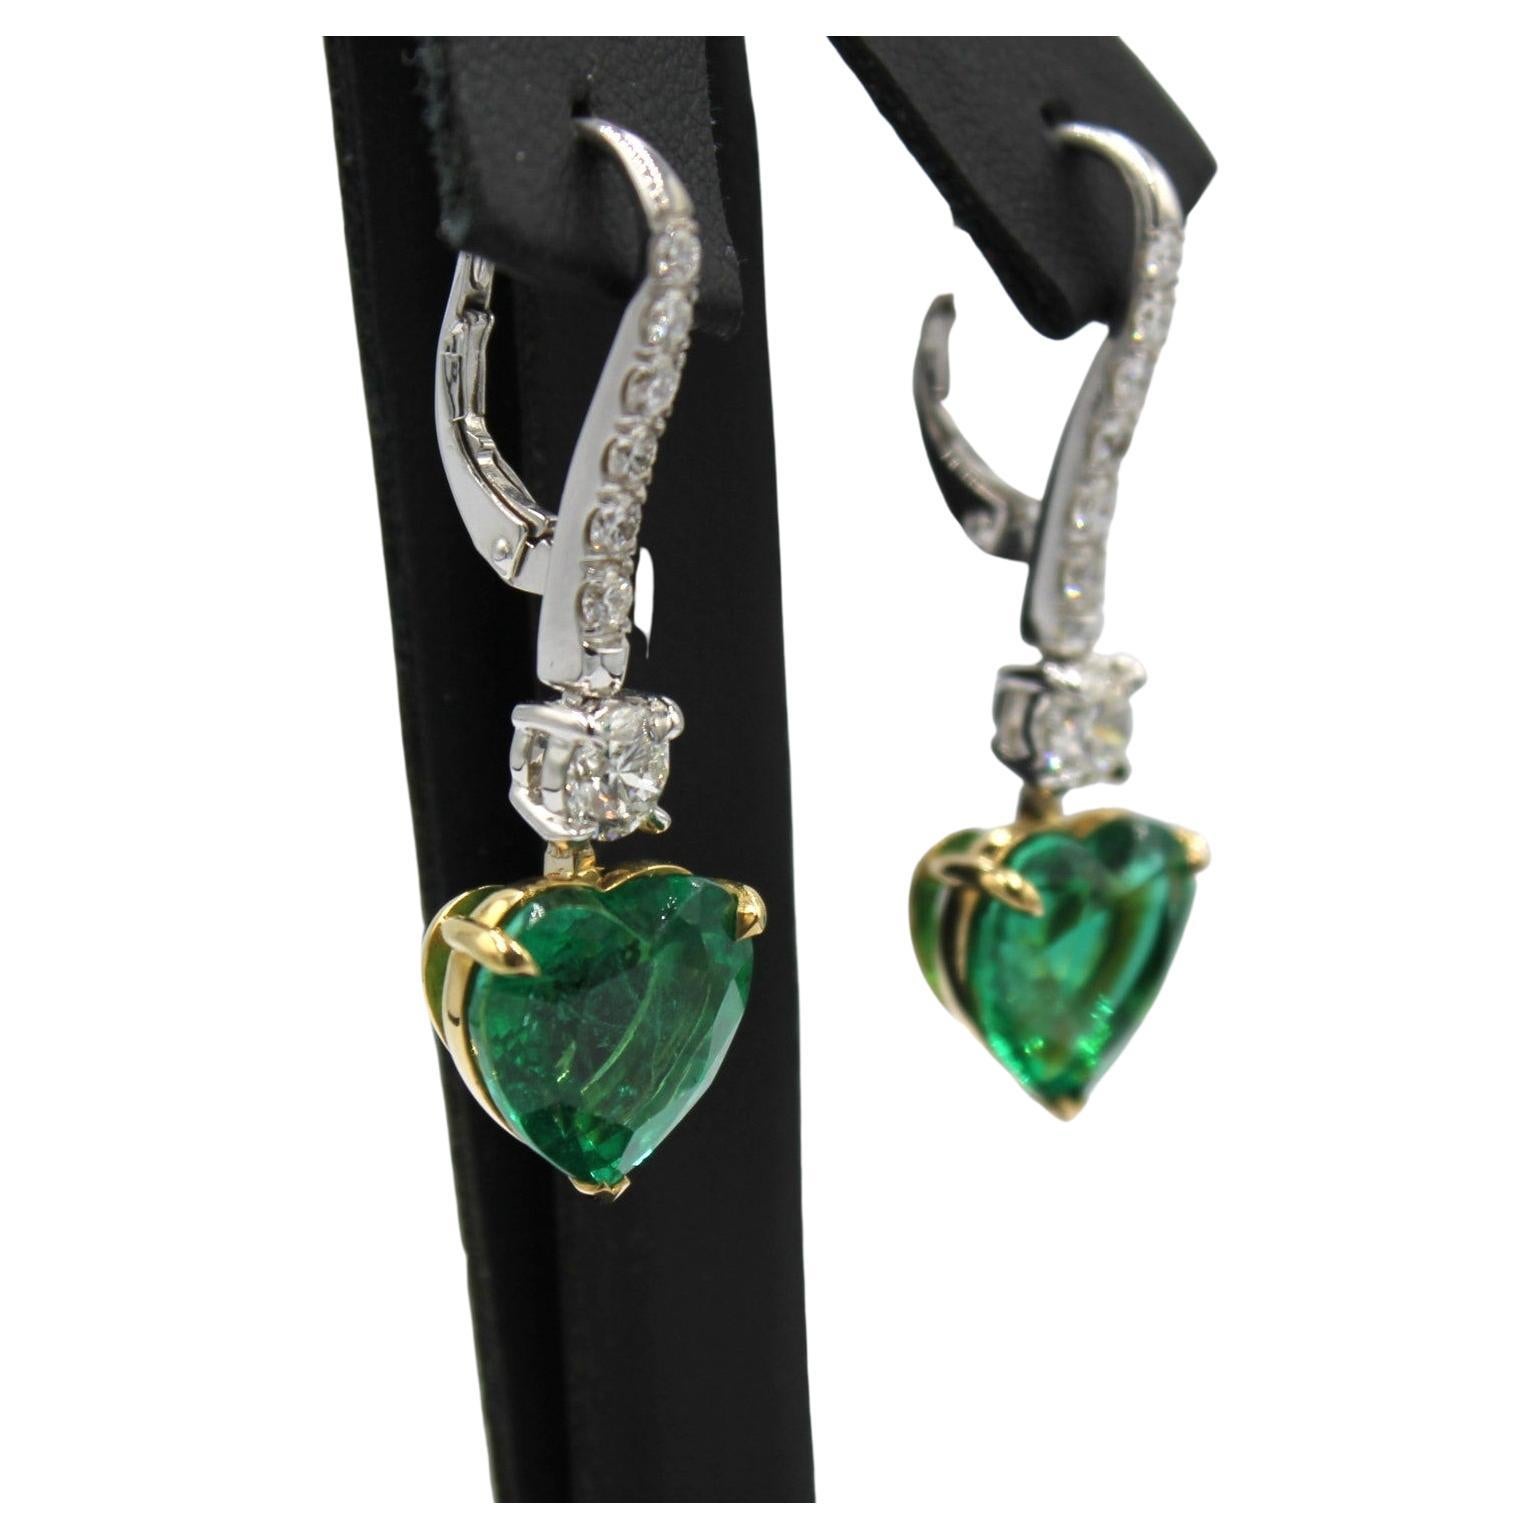 8.79 carats Paired Heart-shaped Zambian Emerald with fourteen round Diamonds totaling the weight of 1.26 carats. 

This piece will highlight your elegance and uniqueness. 

*Lab Certificate is available upon request*

Item Details:
- Type: Earring
-